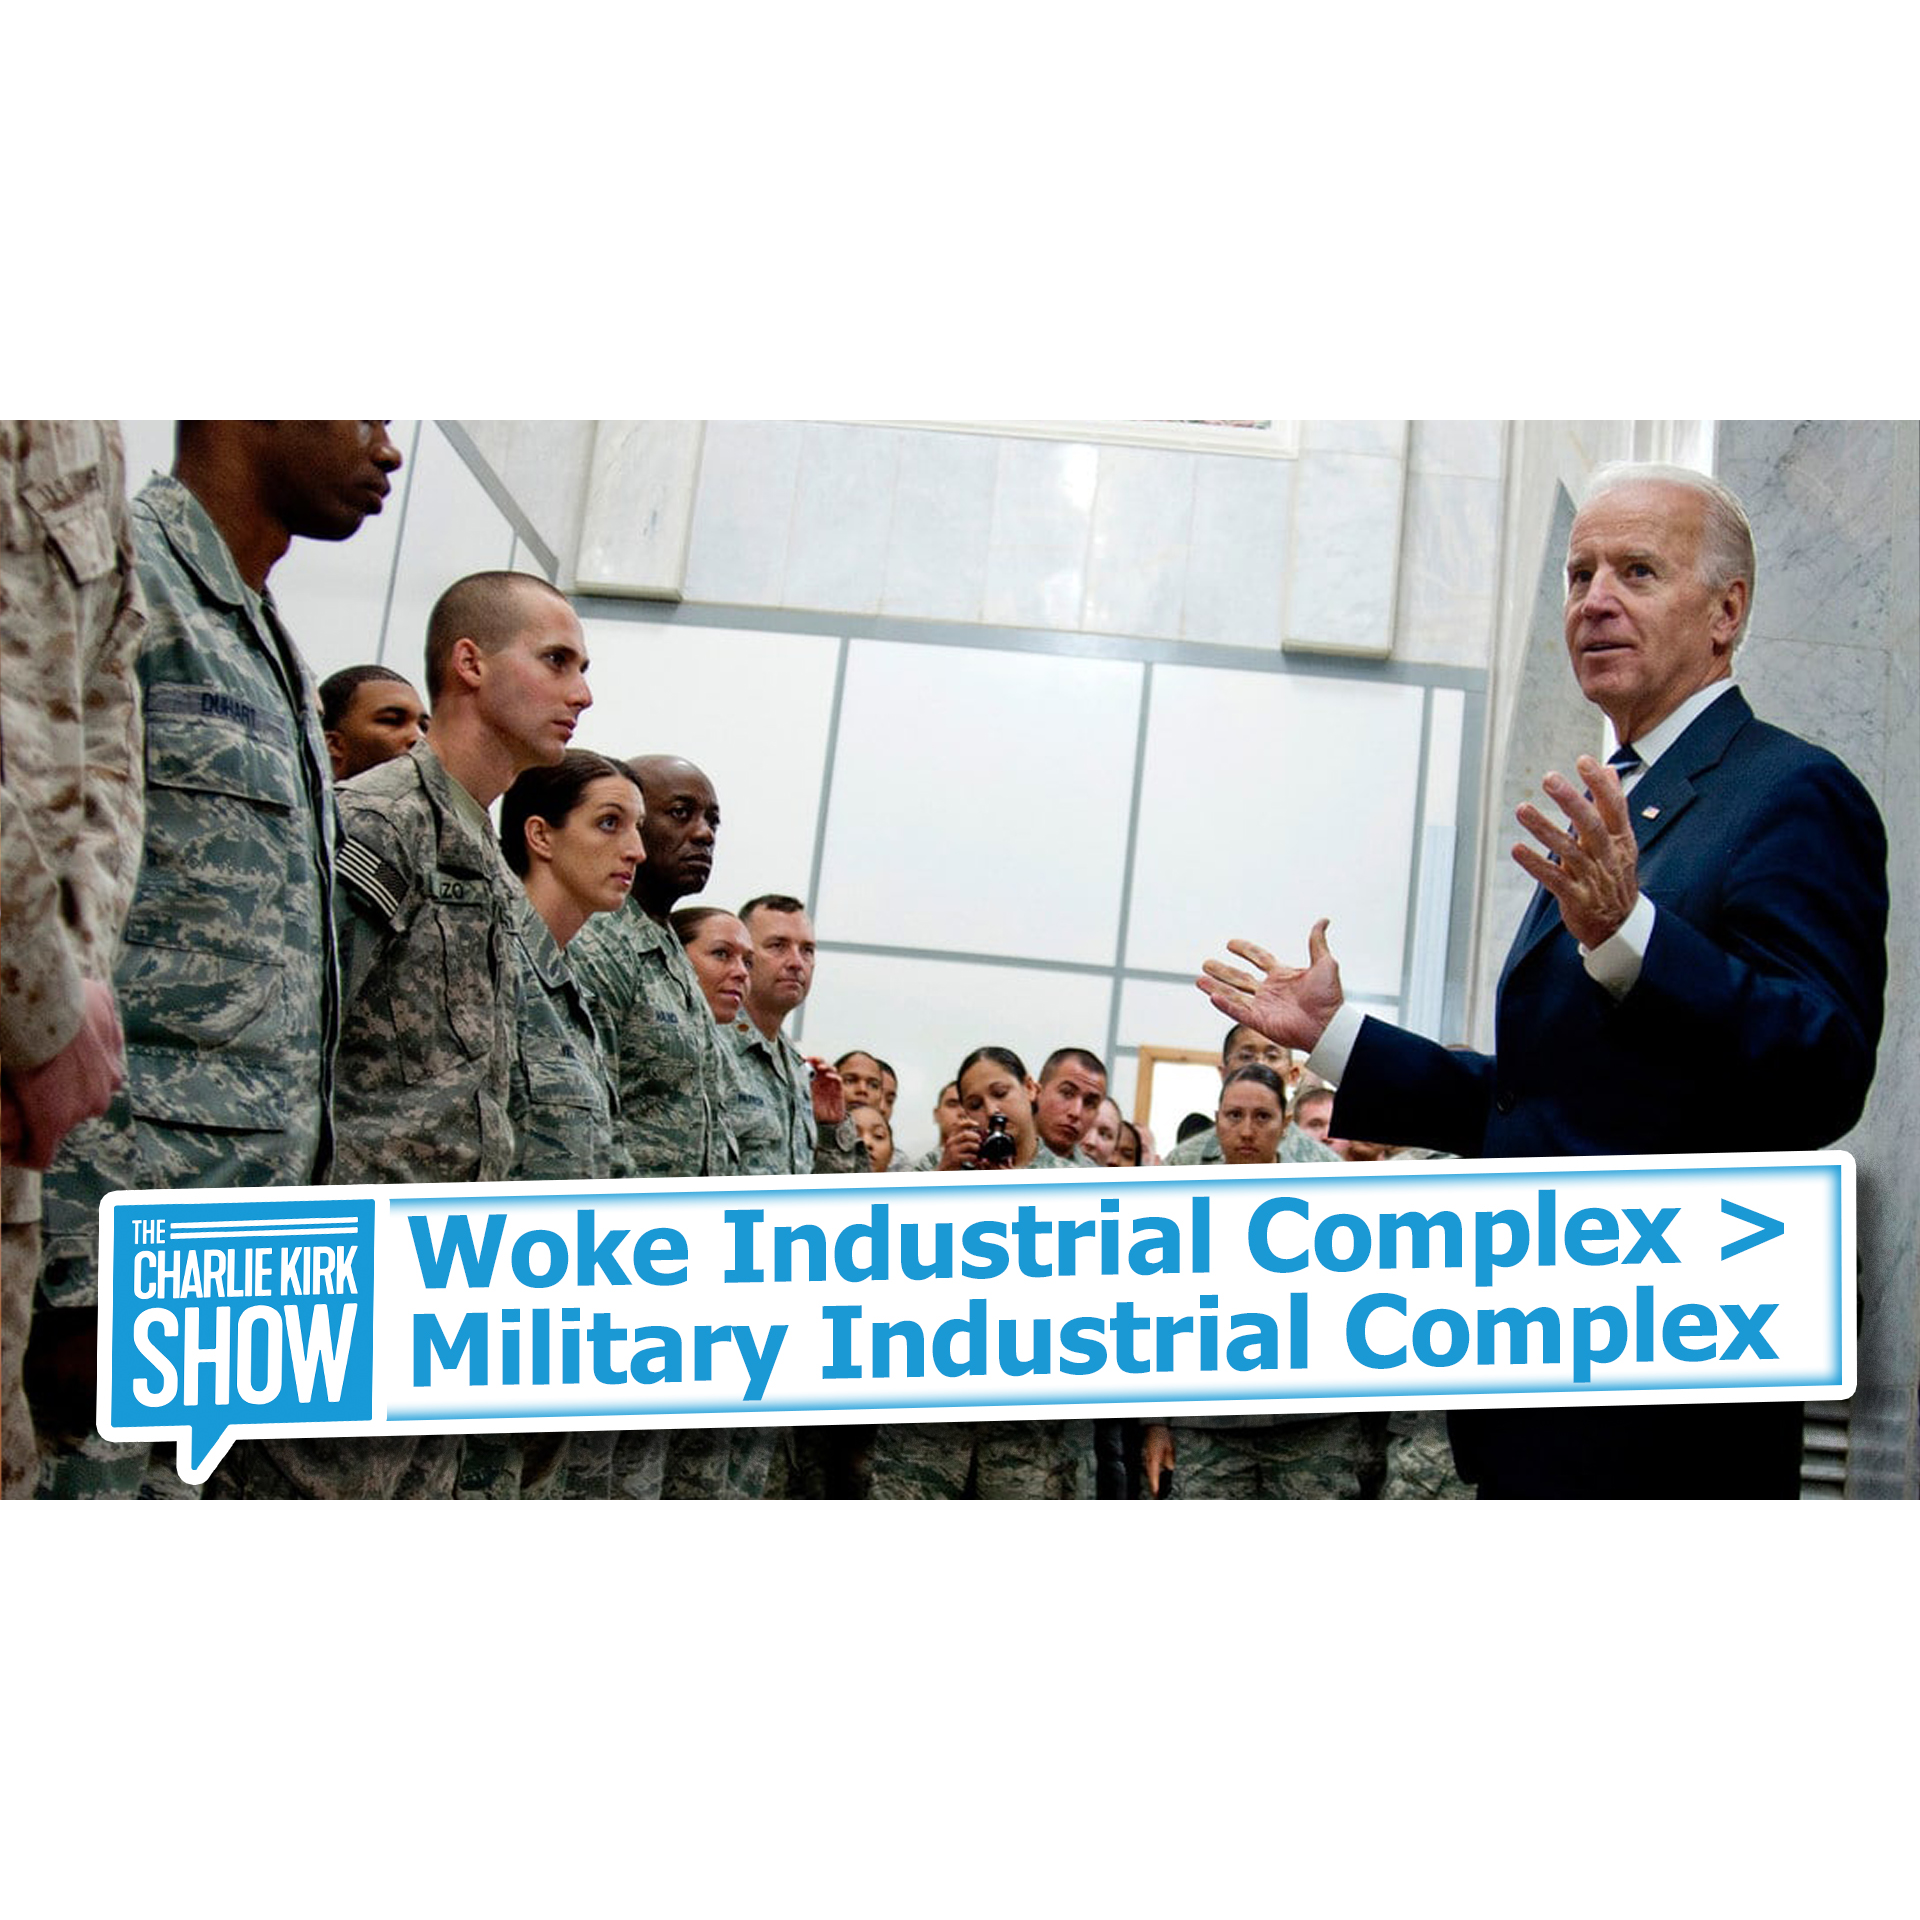 The Woke Military Industrial Complex